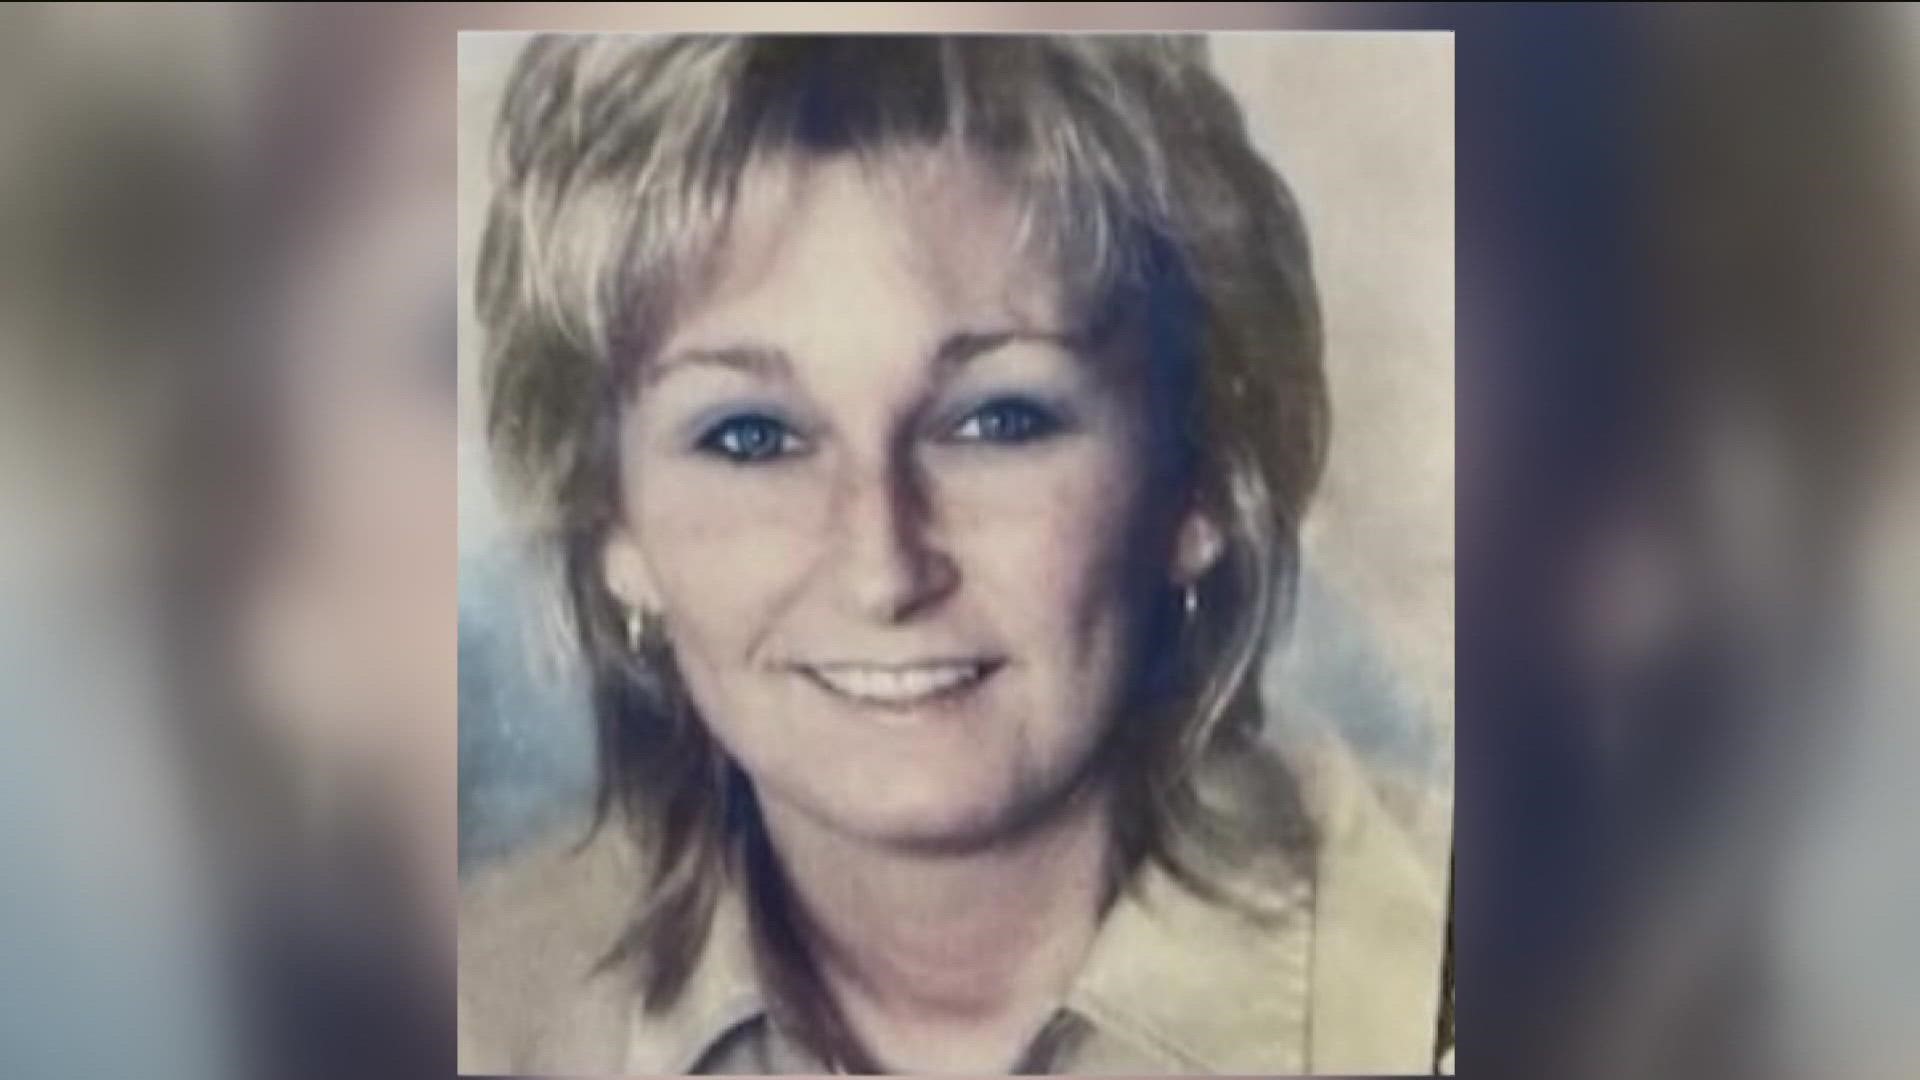 The Lenawee County Sheriff's Office turned the case over 15 months after Dee Warner was first reported missing.